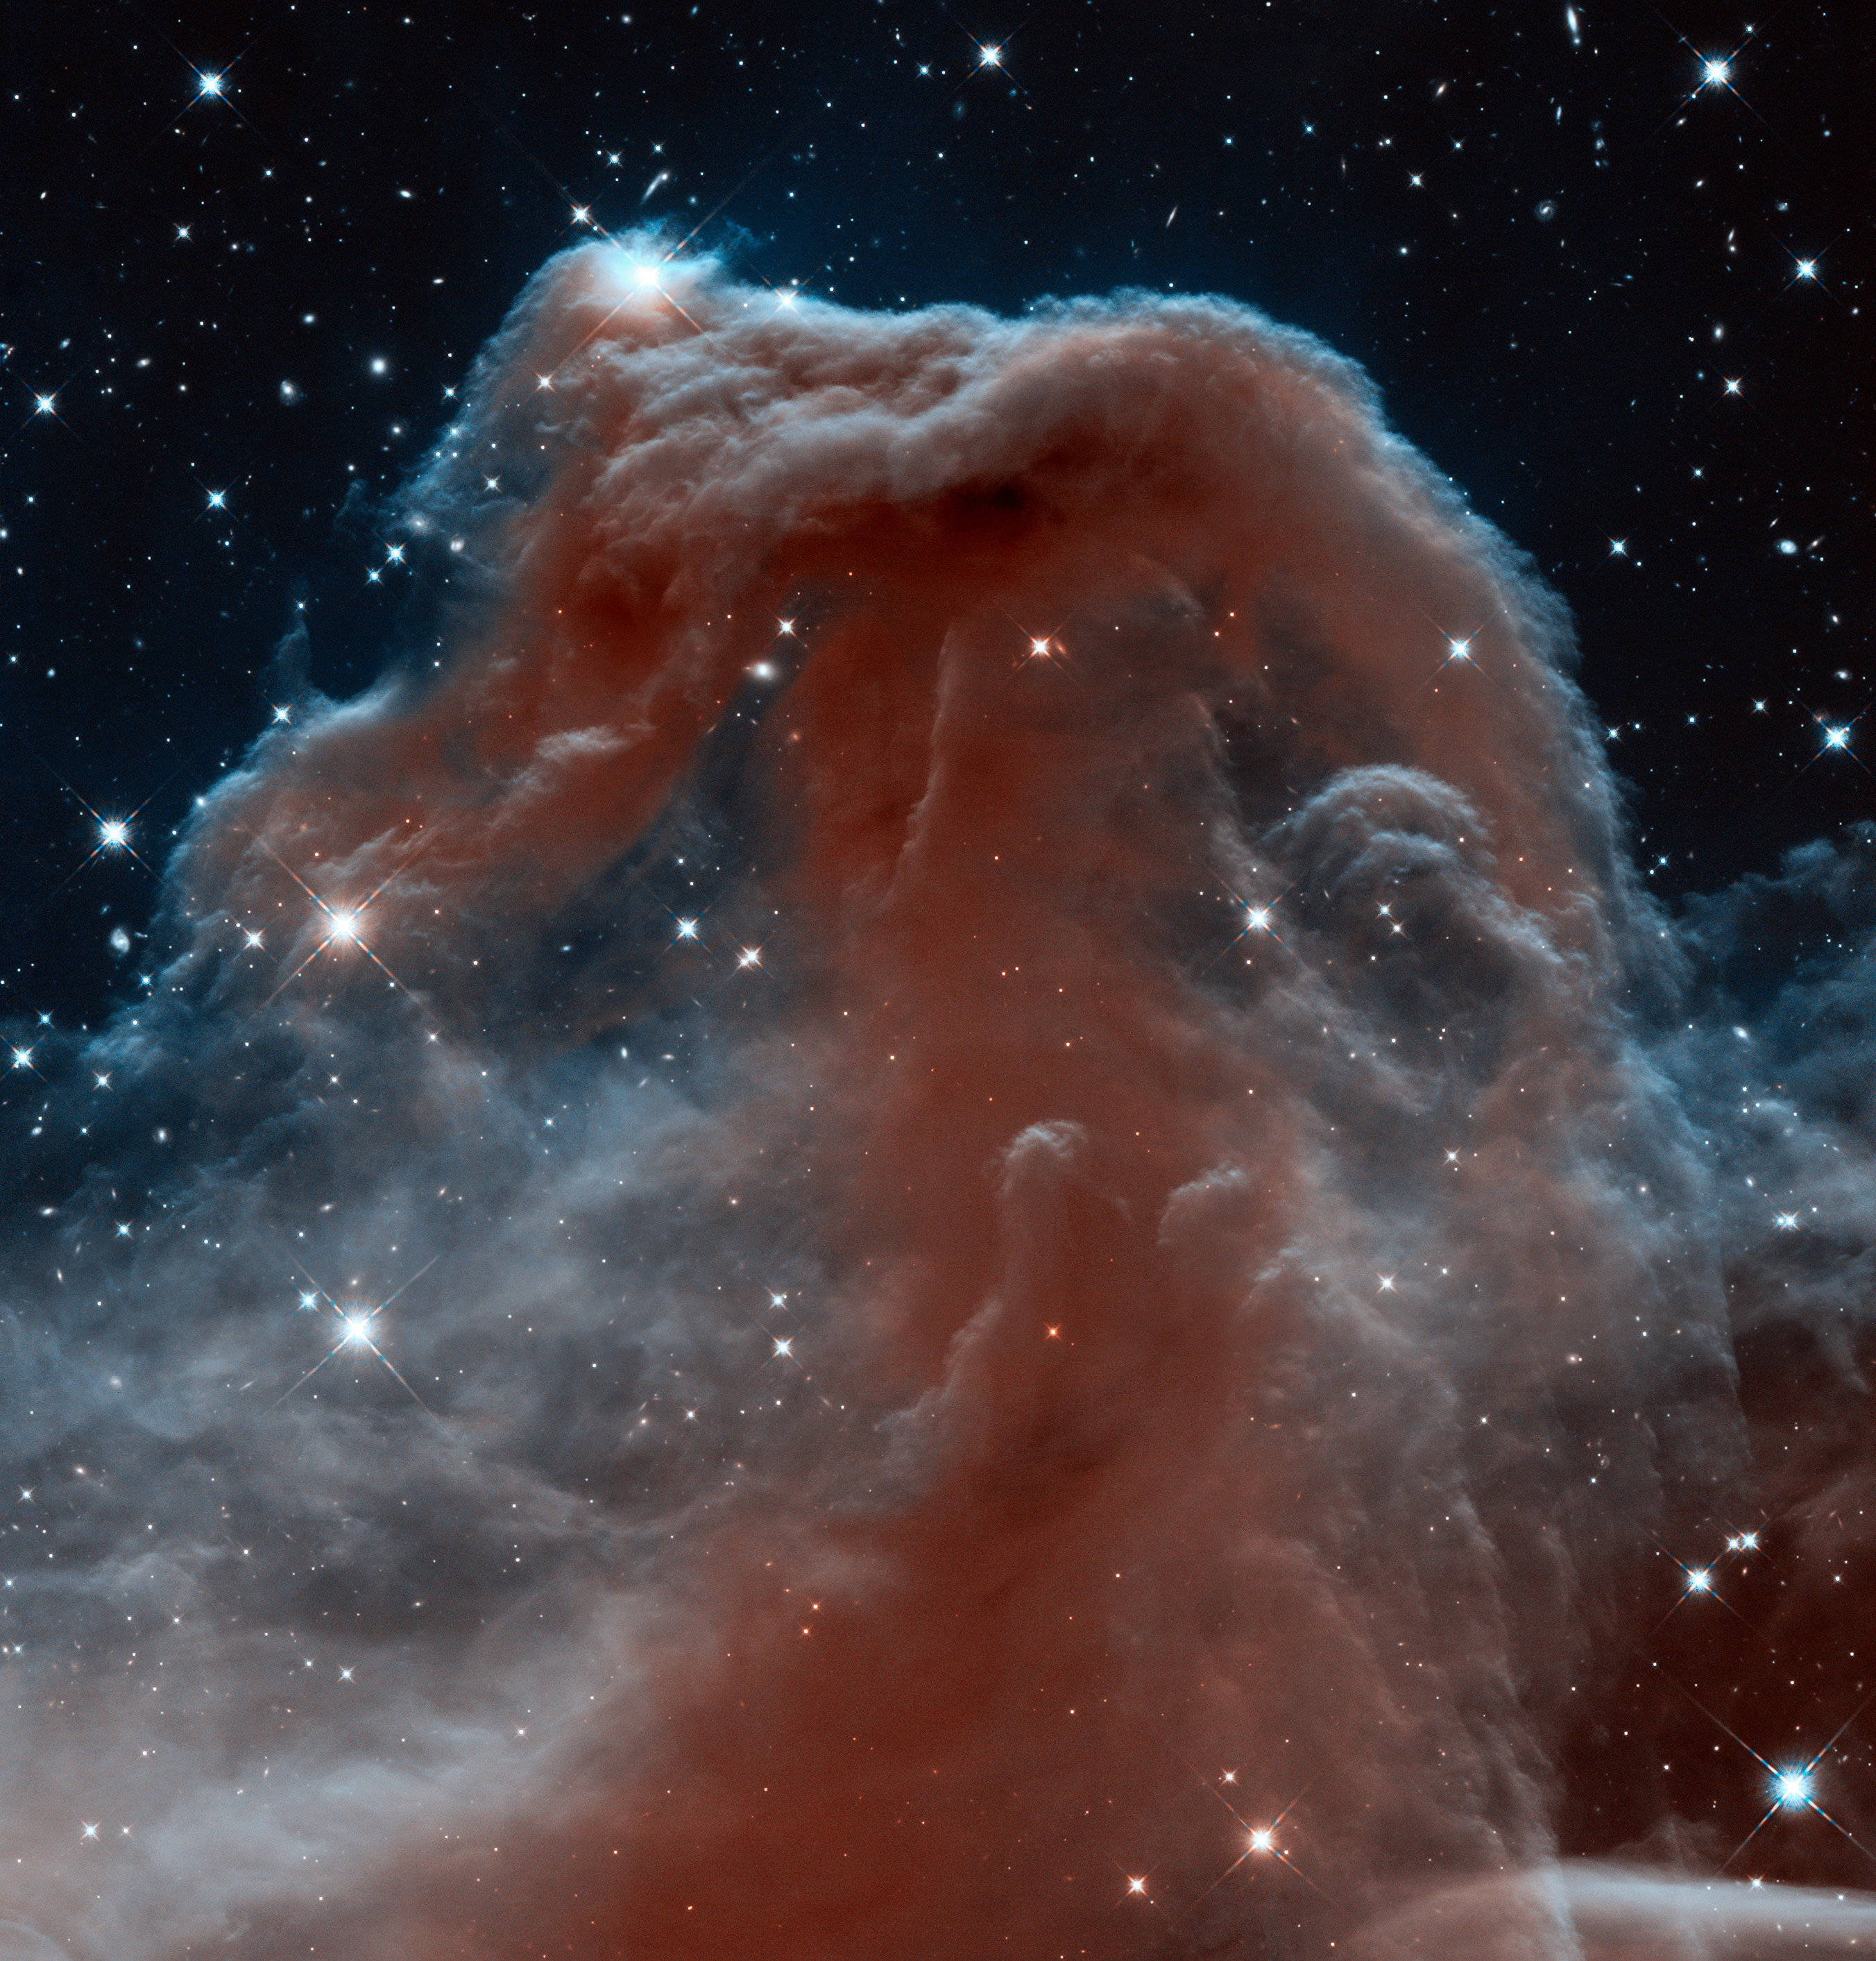 A striking image of the horsehead nebula captured by the JWST, featuring rich red and blue colors with bright stars scattered around it.